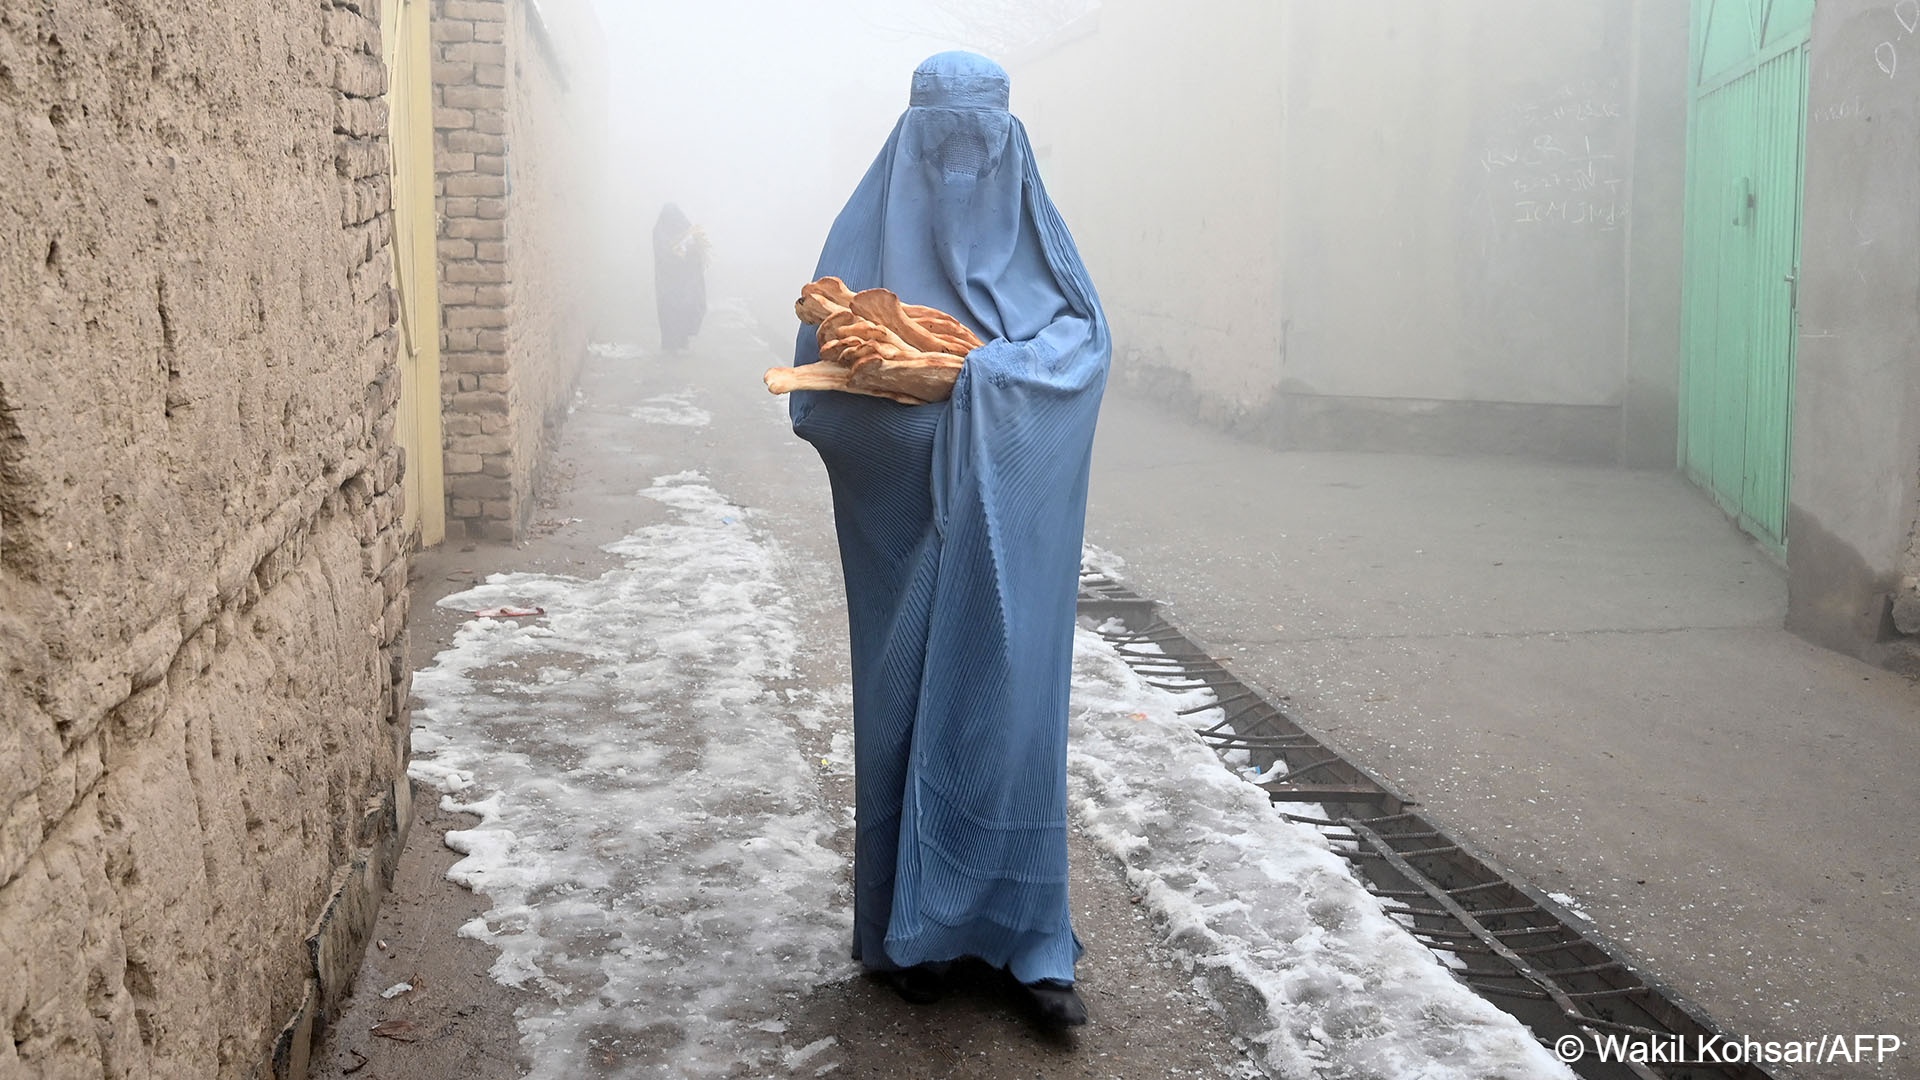 A woman wearing a burka walks along a road towards her home after receiving free bread distributed as part of the Save Afghans From Hunger campaign in Kabul on 18 January 2022.